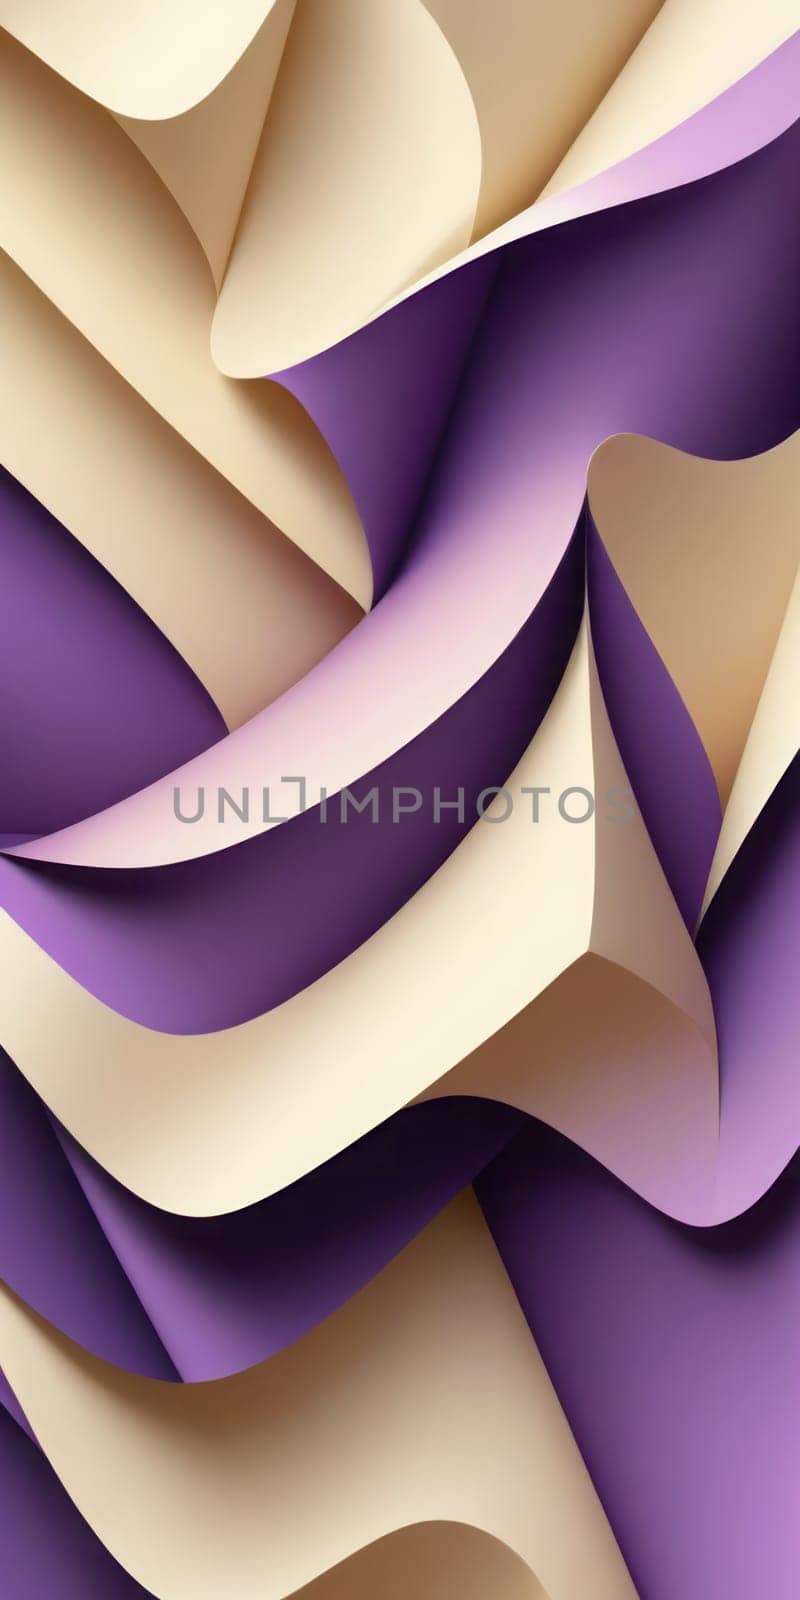 Folded Shapes in Purple Ivory by nkotlyar